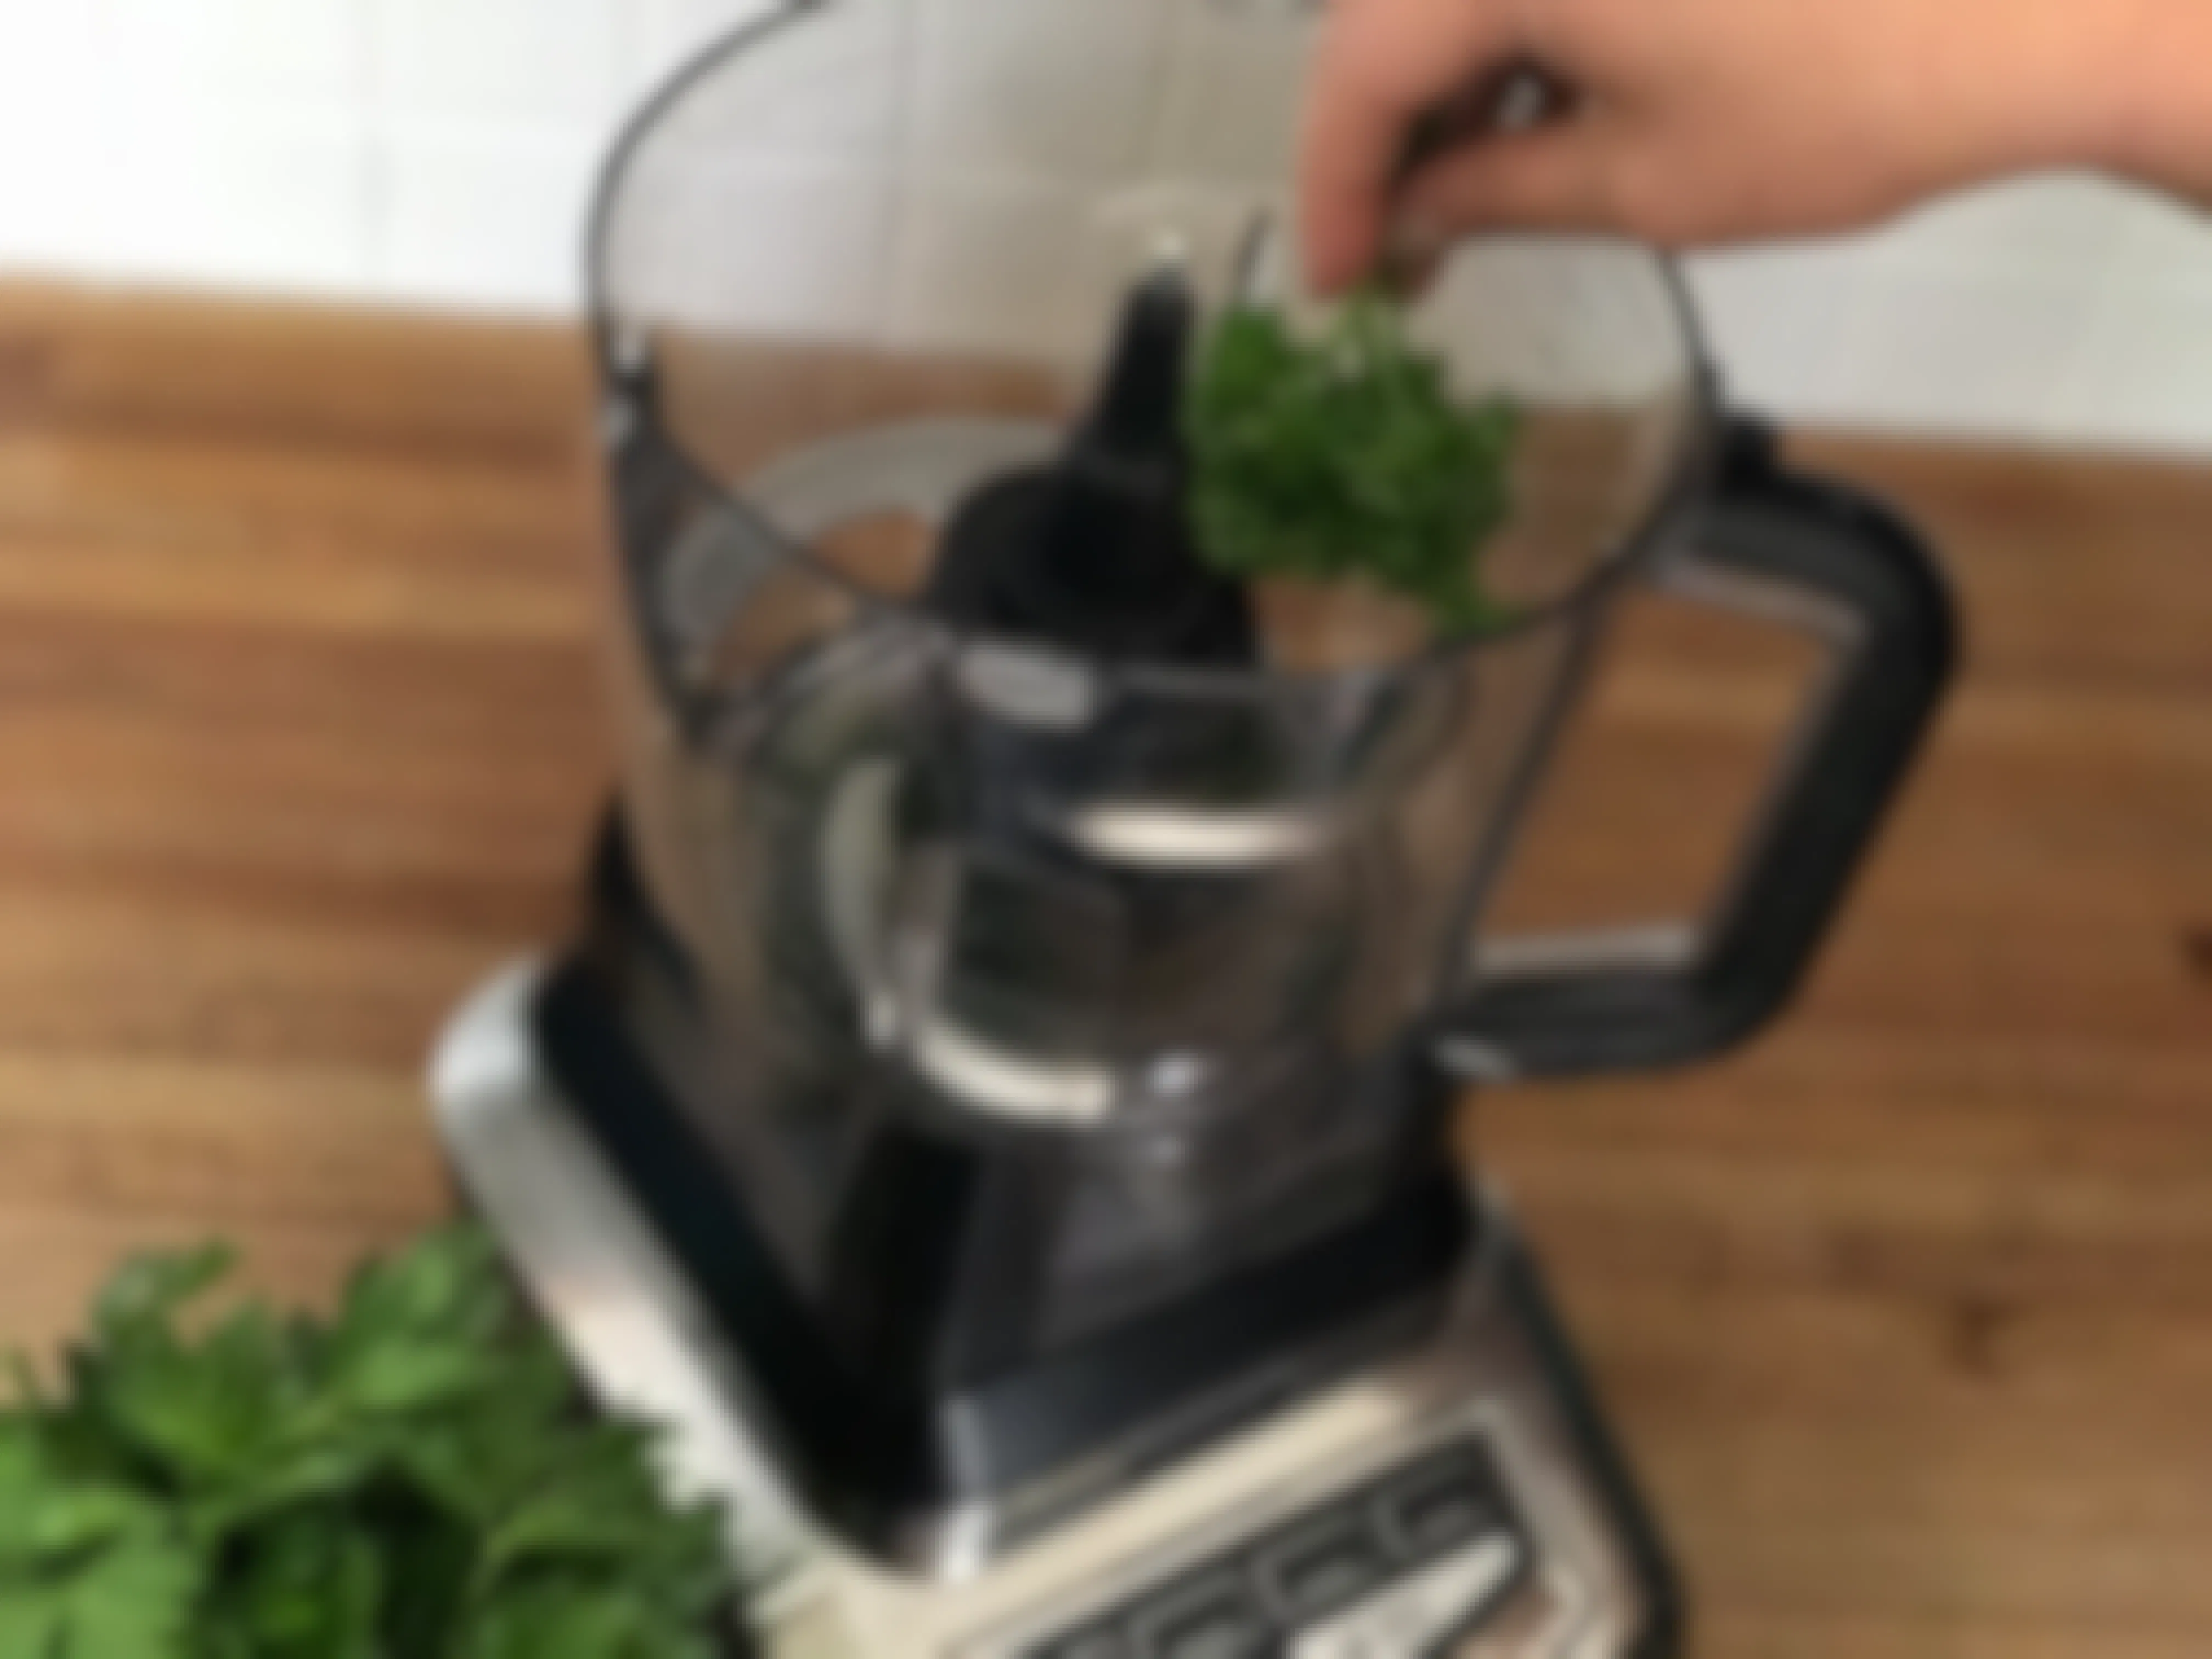 Parsley being tossed into a blender